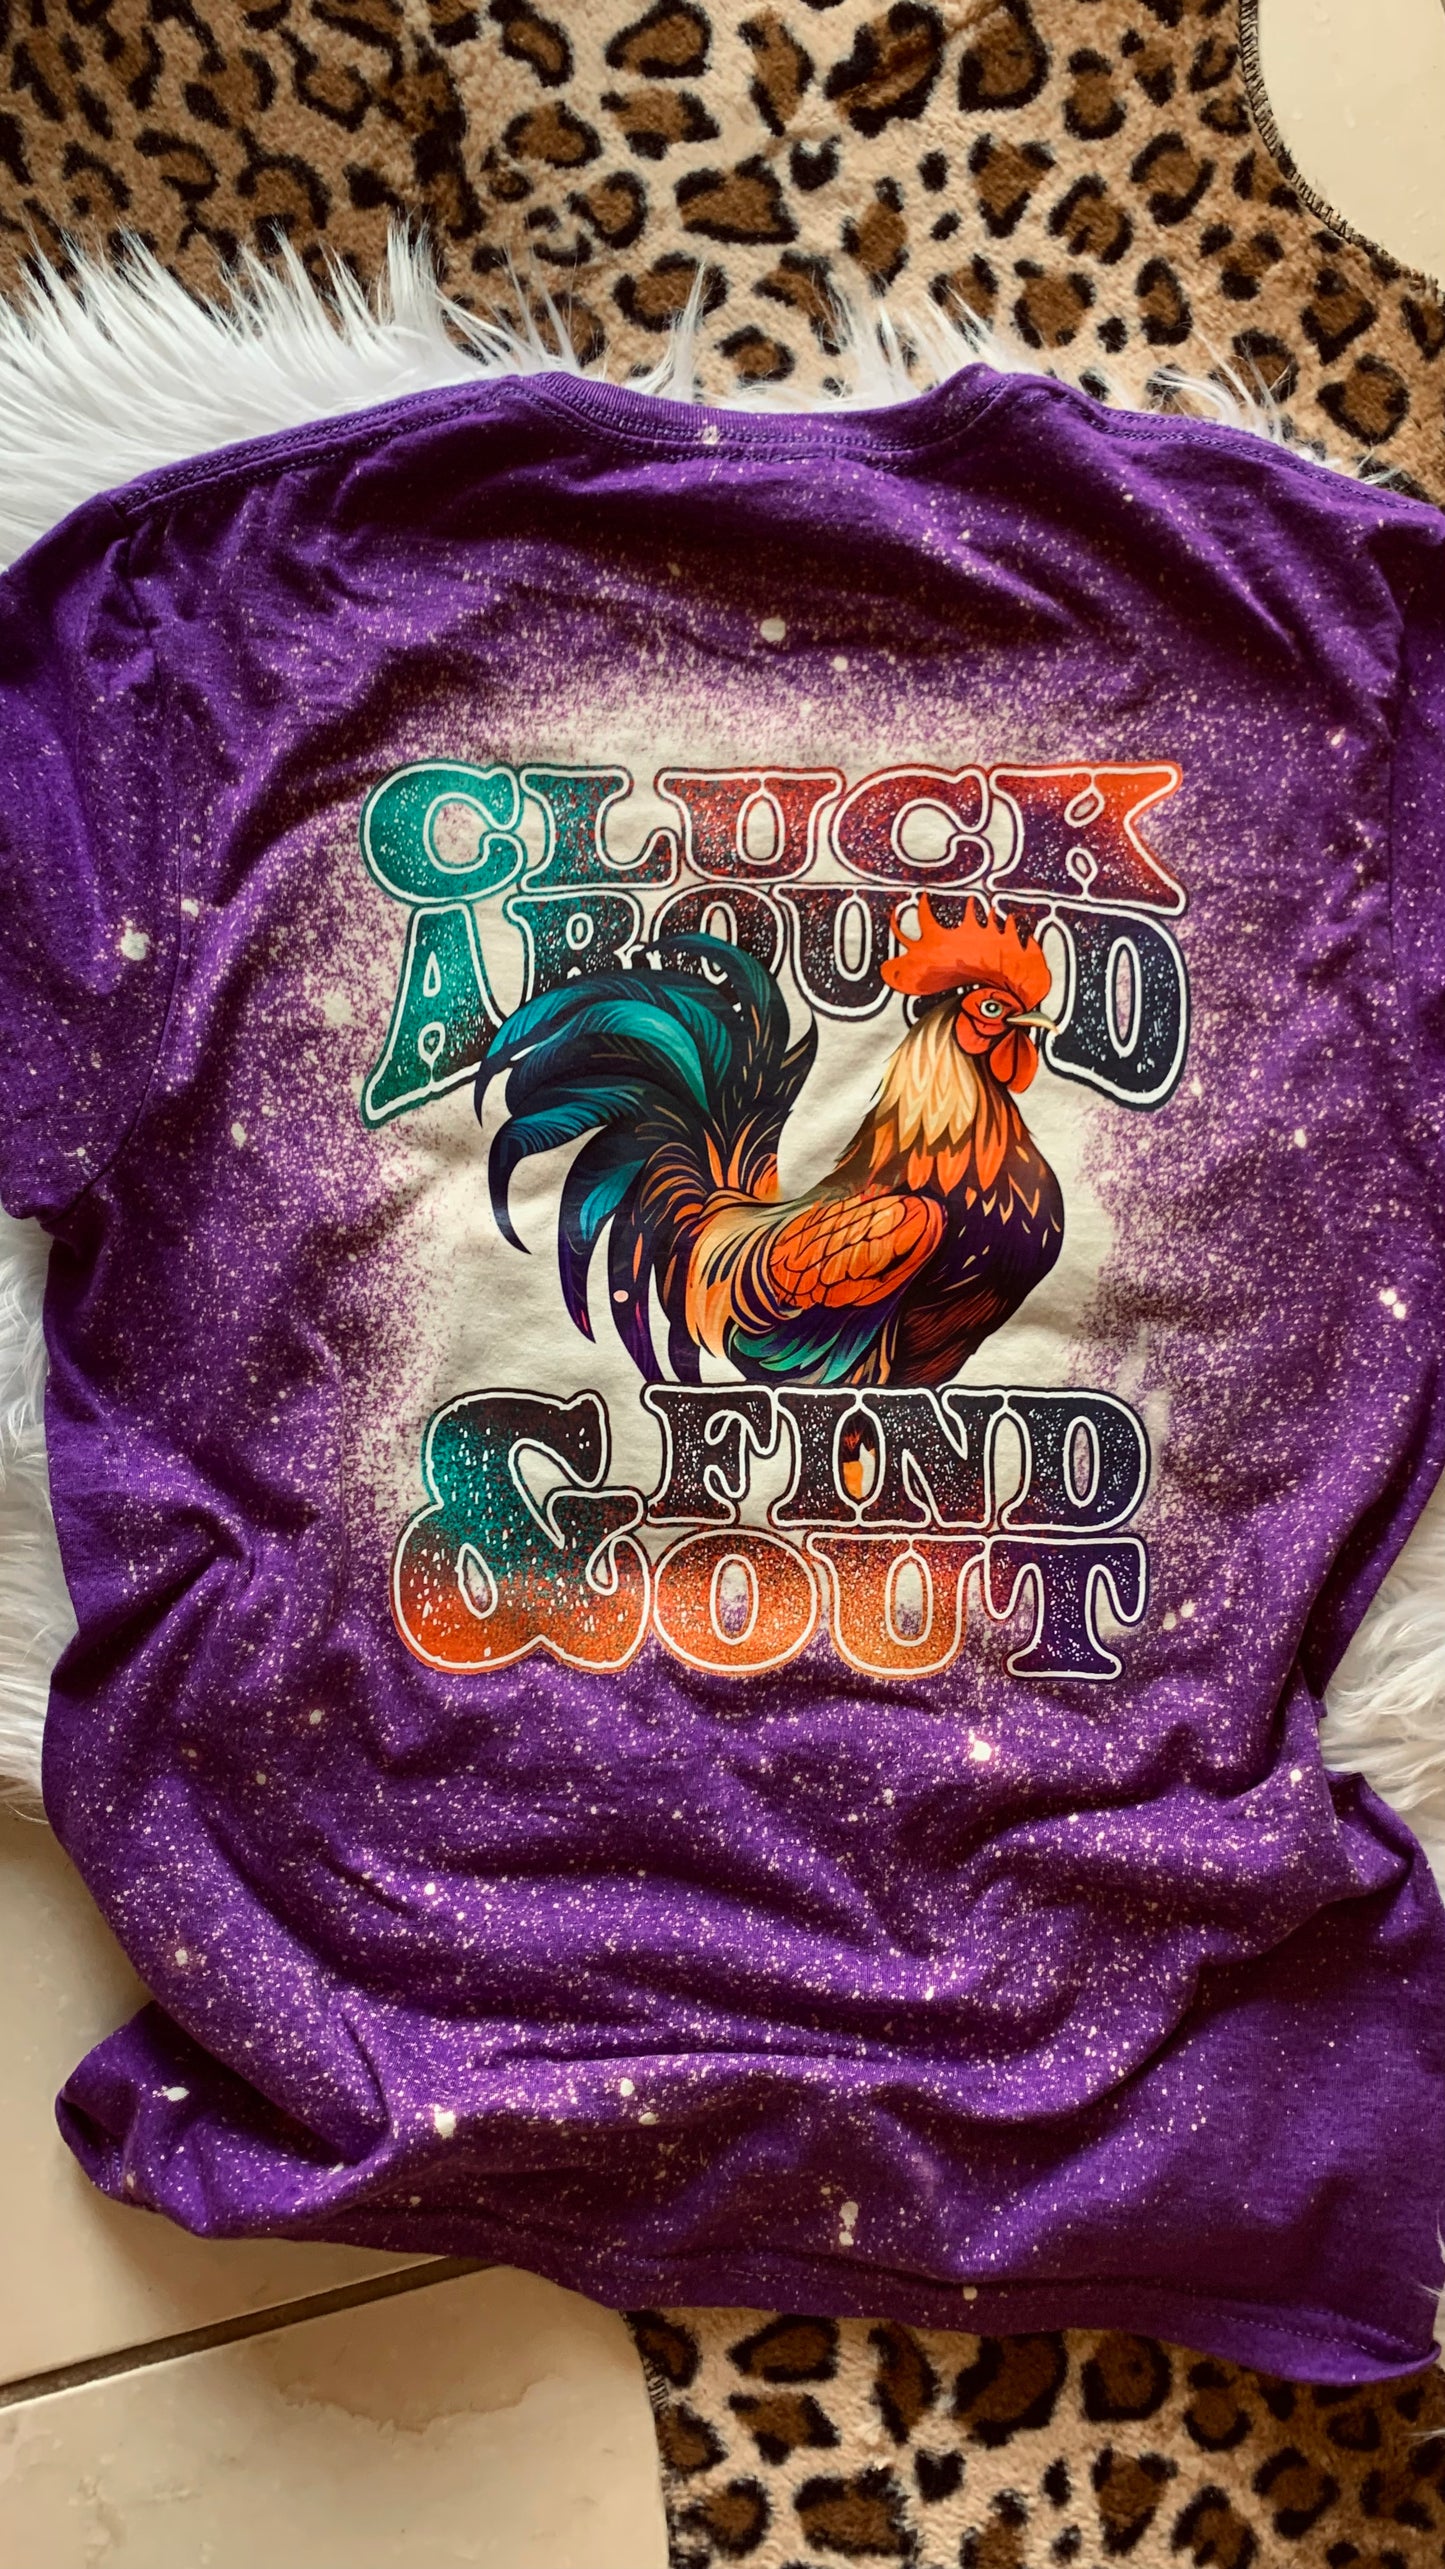 Cluck Around & Find out